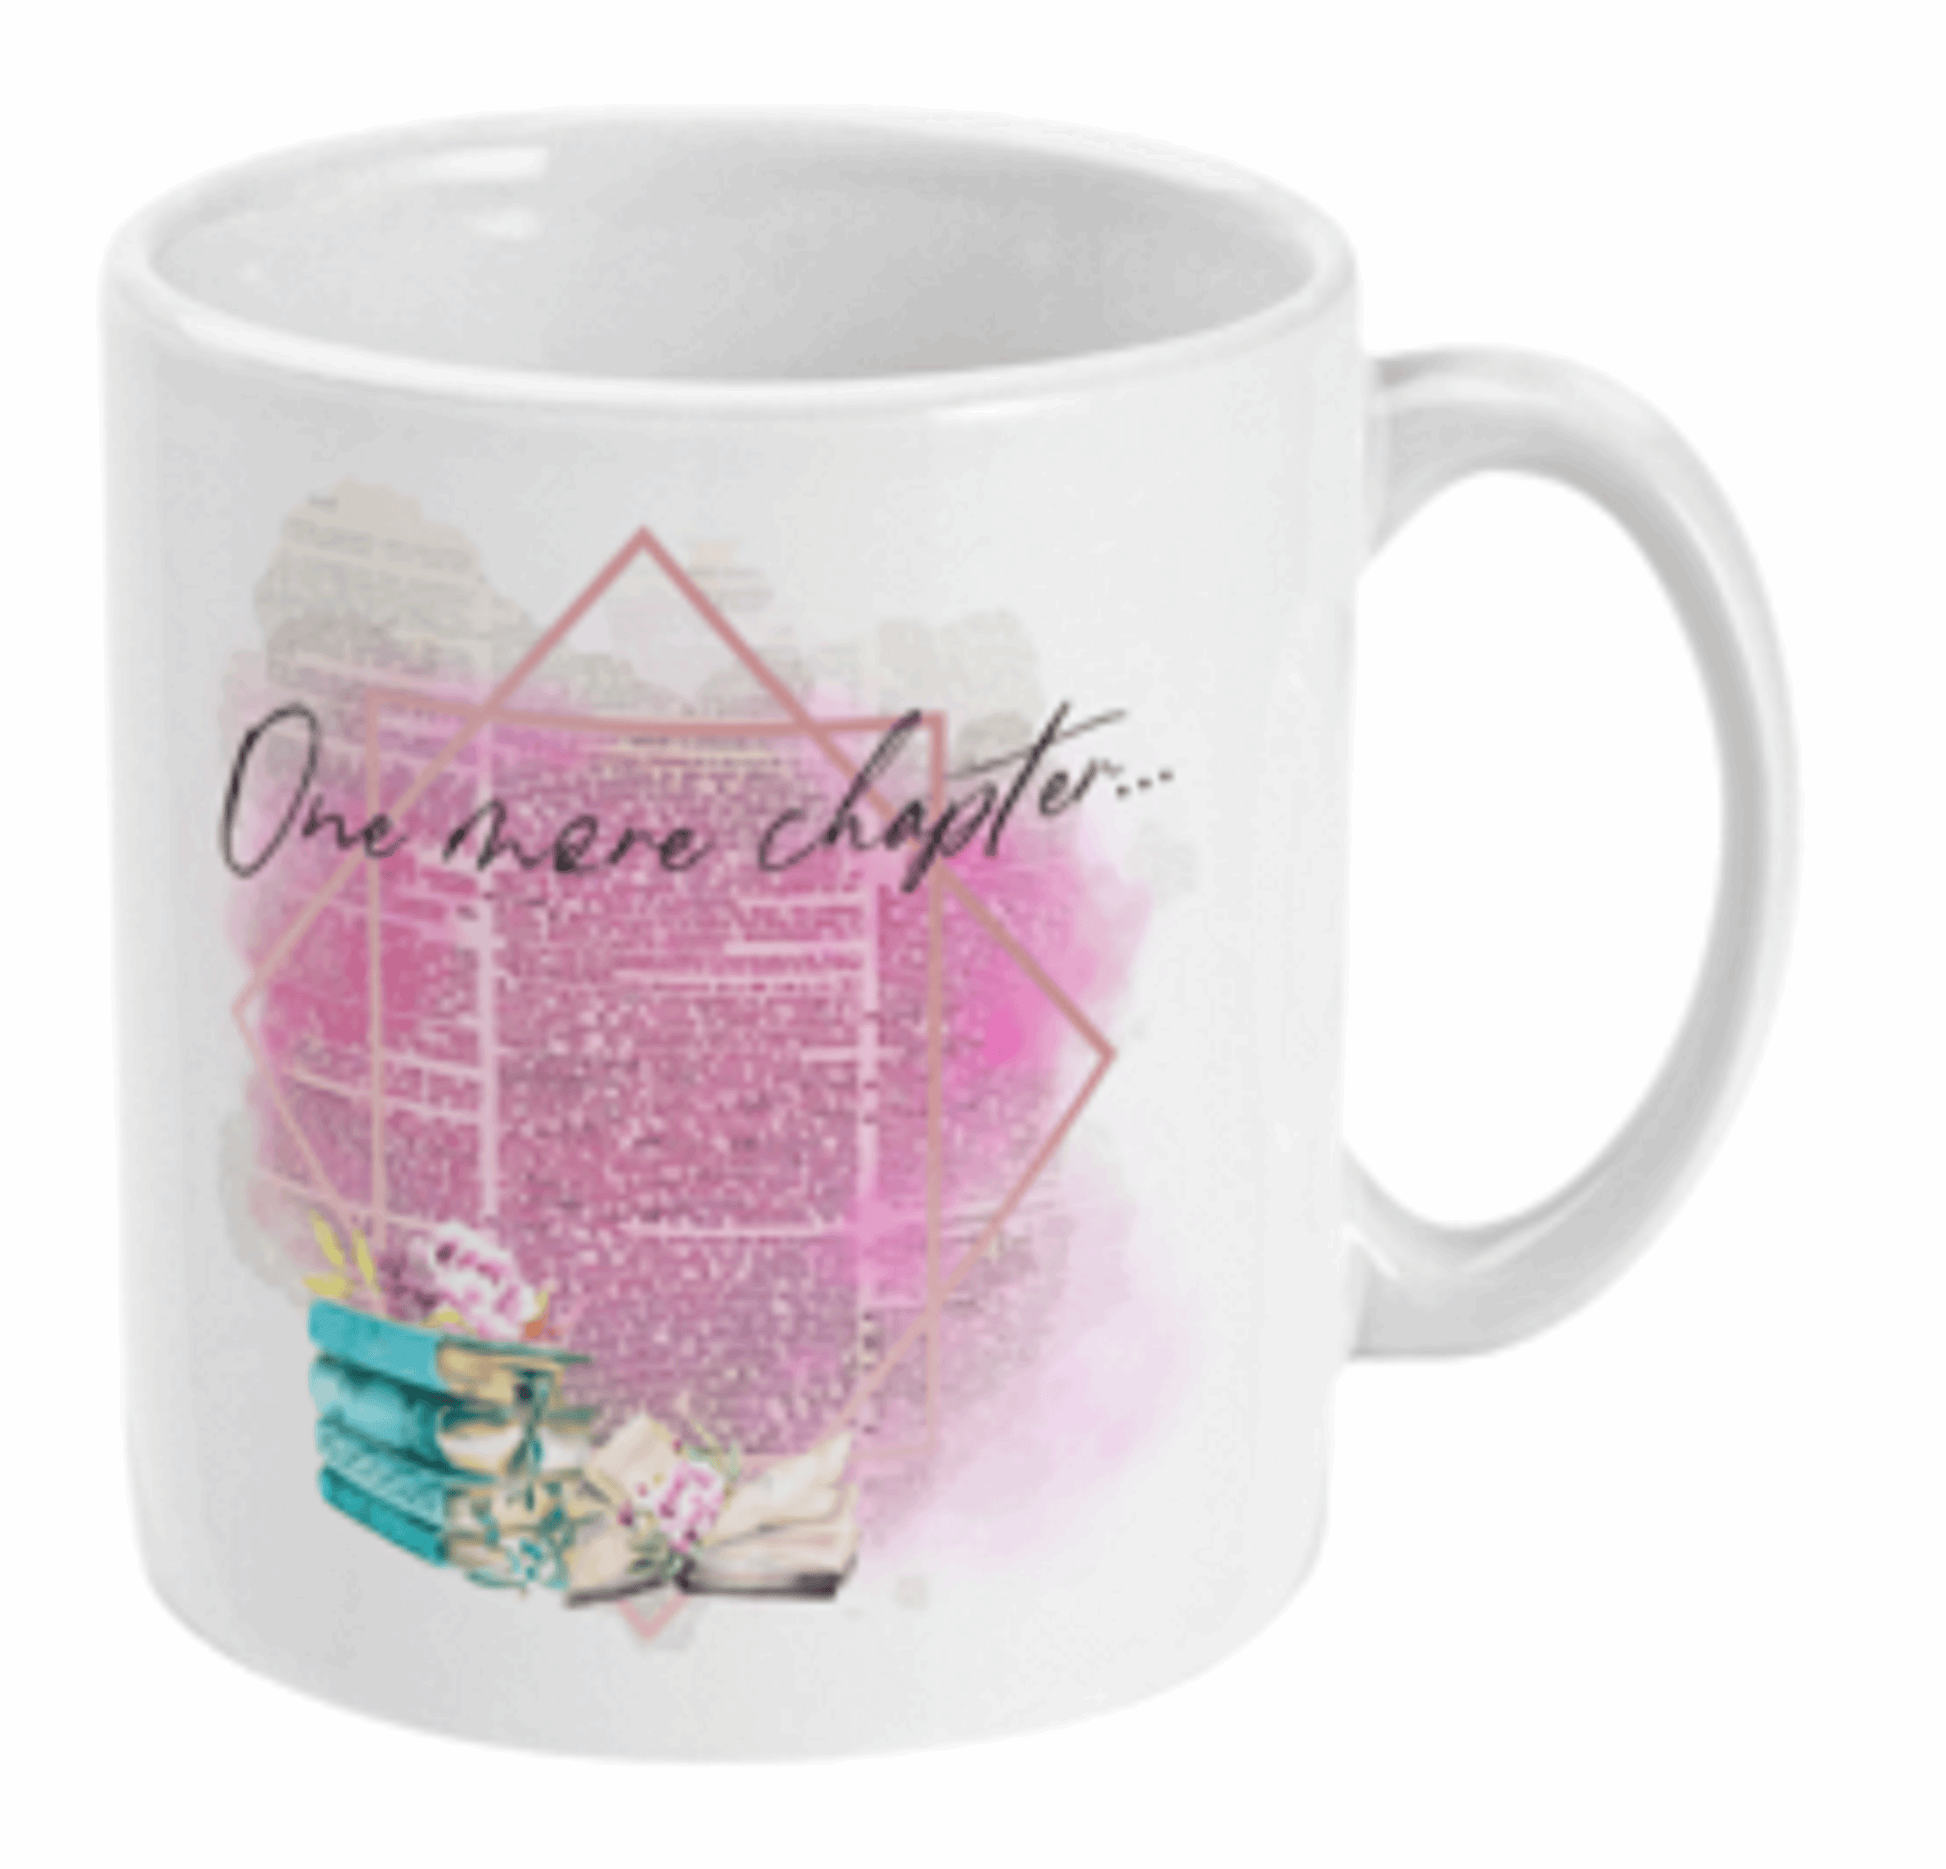  One More Chapter Book Coffee Mug by Free Spirit Accessories sold by Free Spirit Accessories